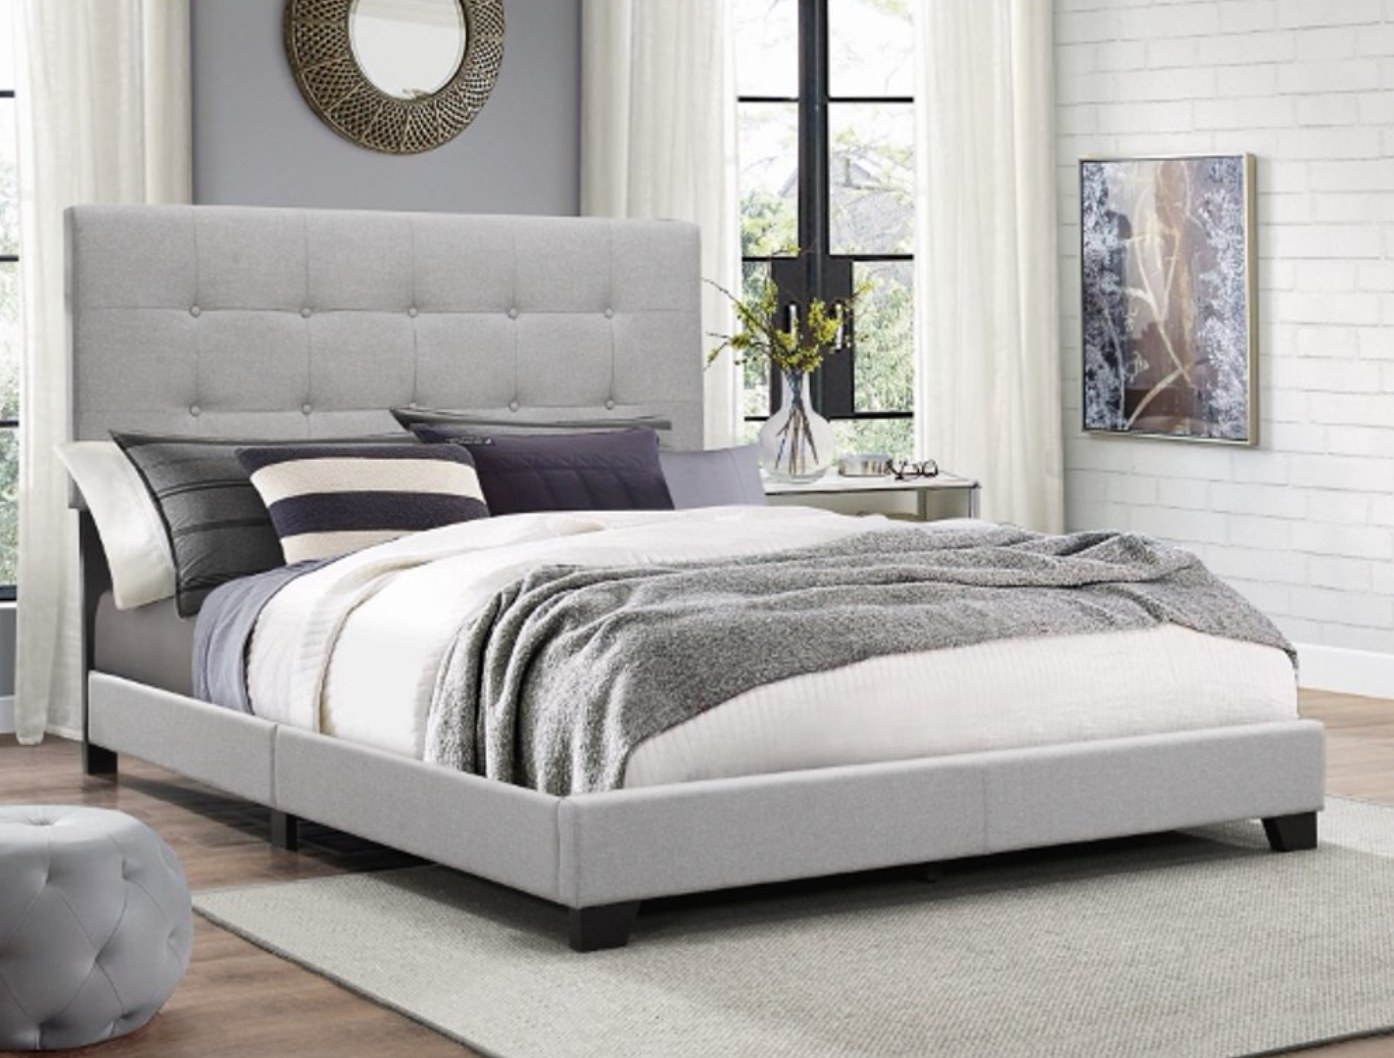 The gray panel bed